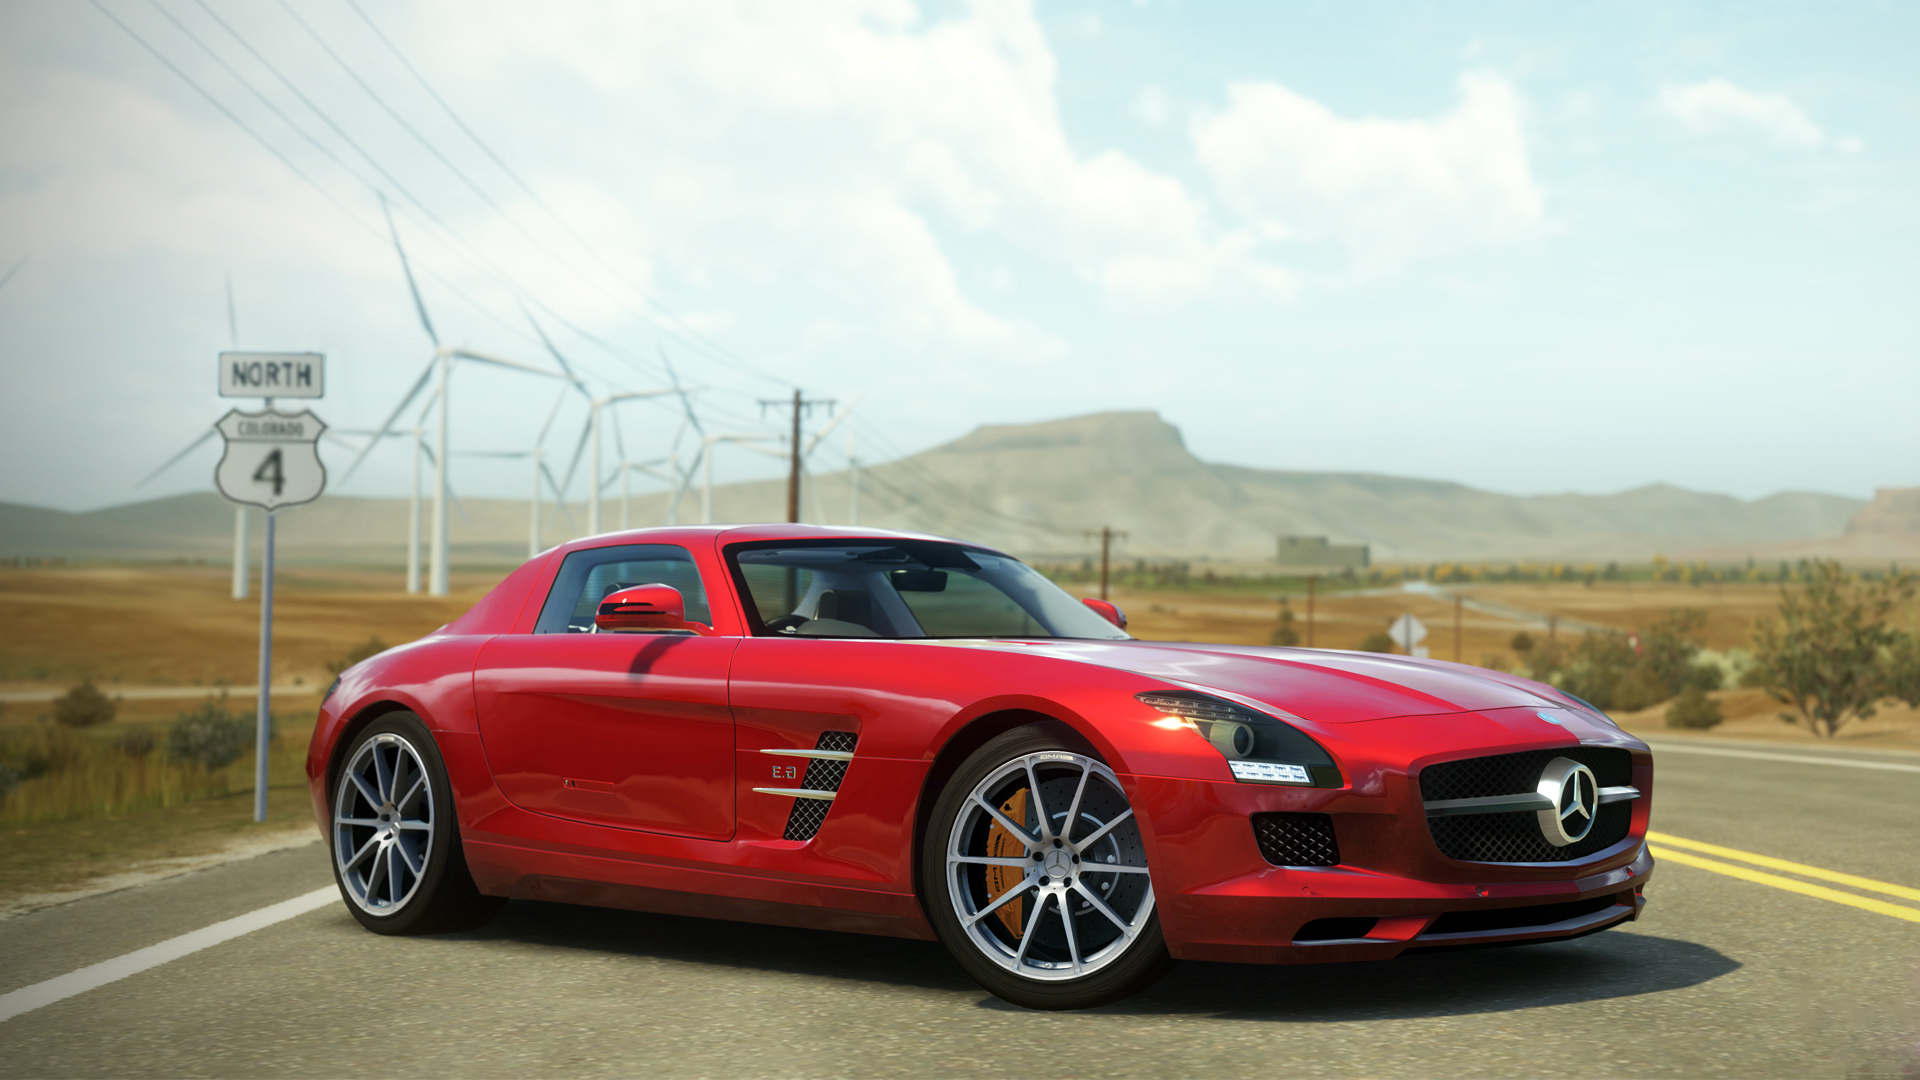 Video Game Forza Motorsport 4 Vehicle 1920x1080